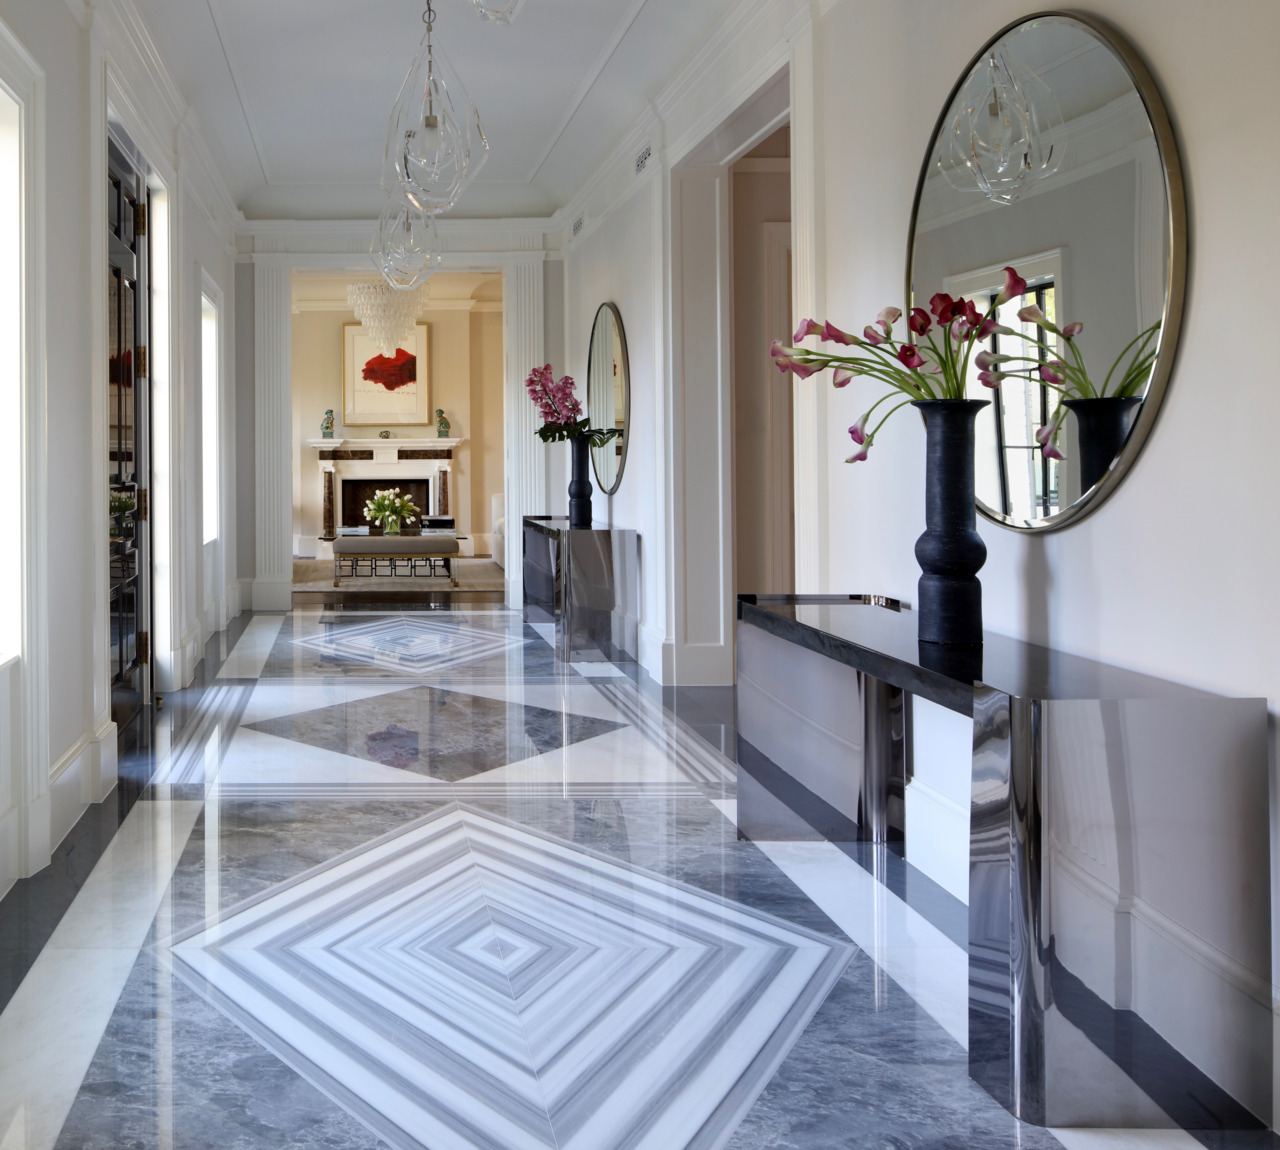 Beverly Hills entrance gallery with geometric patterned marble floor